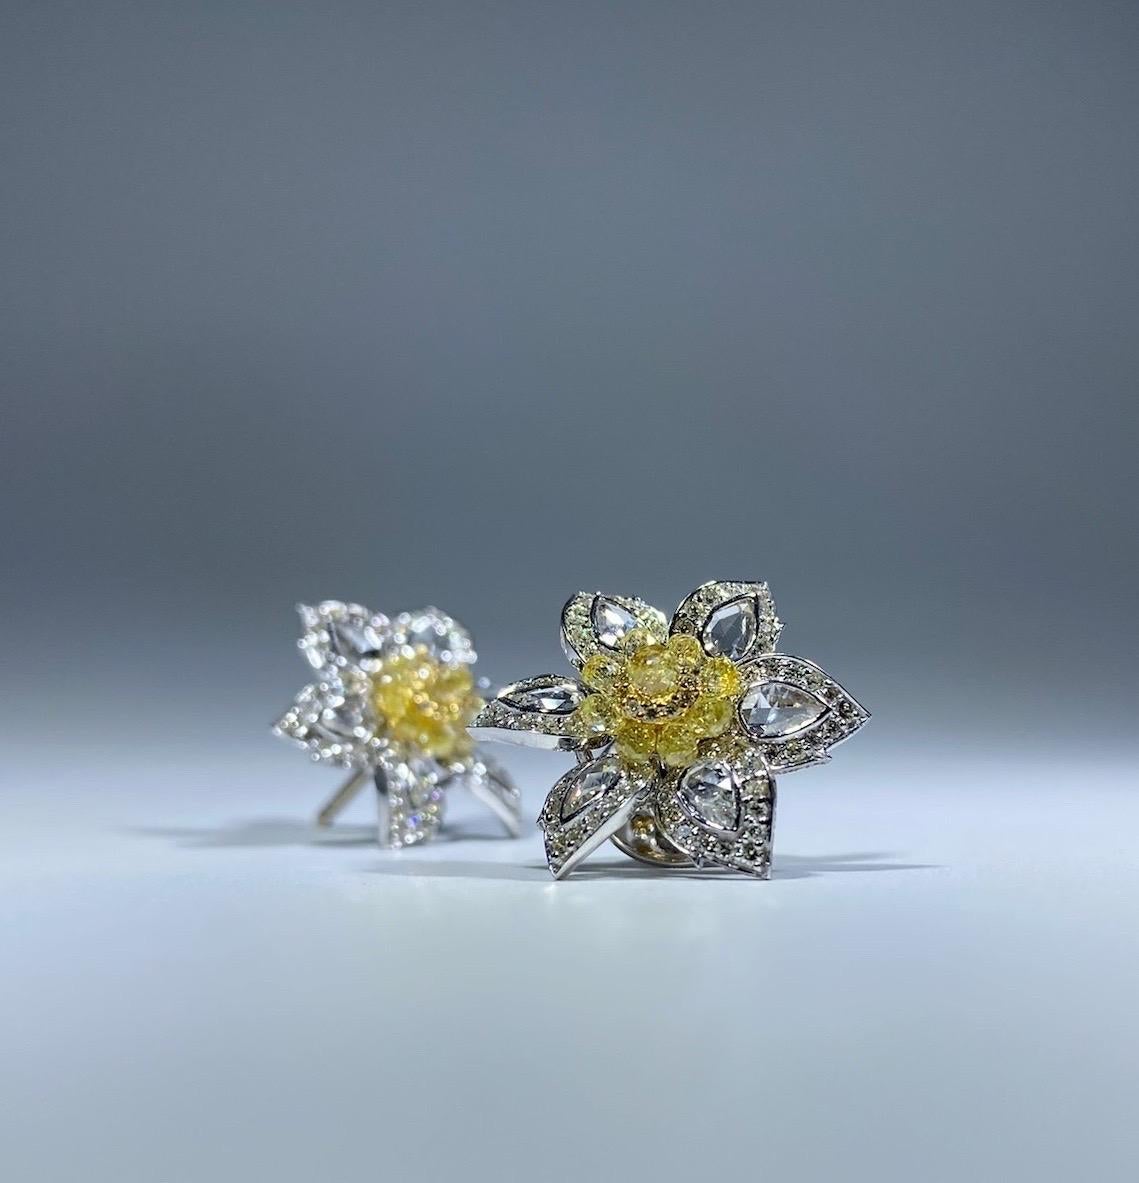 Introducing our exquisite Flower Rose Cut Diamond and 4.08 Carat Fancy Yellow Briolette Earring, a true masterpiece of sophistication and elegance. These stunning earrings are a beautiful fusion of rose-cut diamonds and fancy yellow briolette